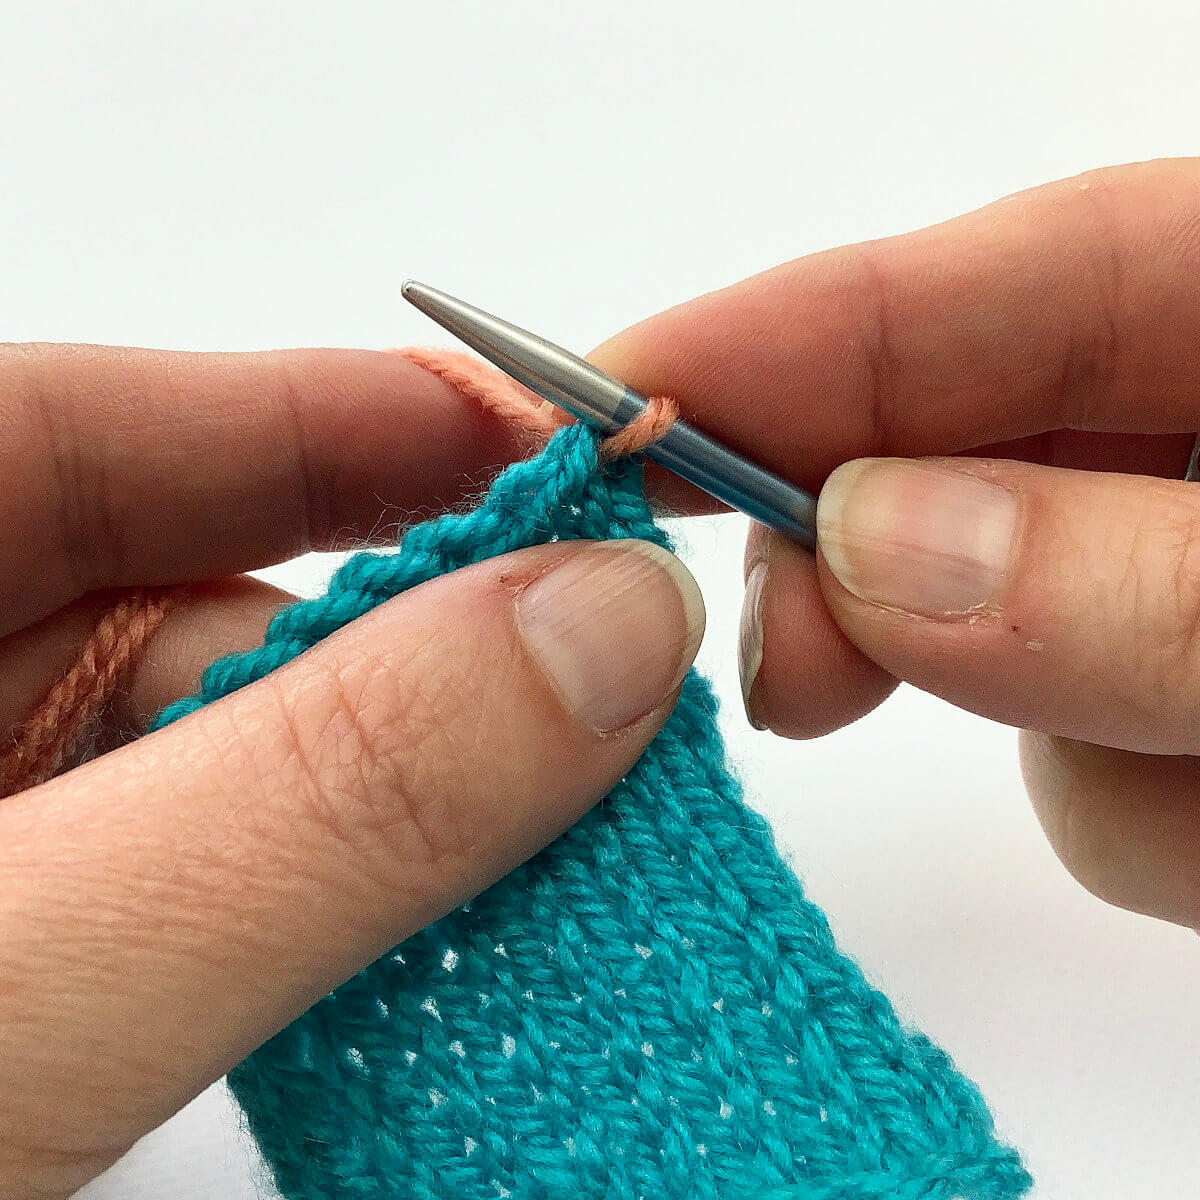 Pick up and knit step 3